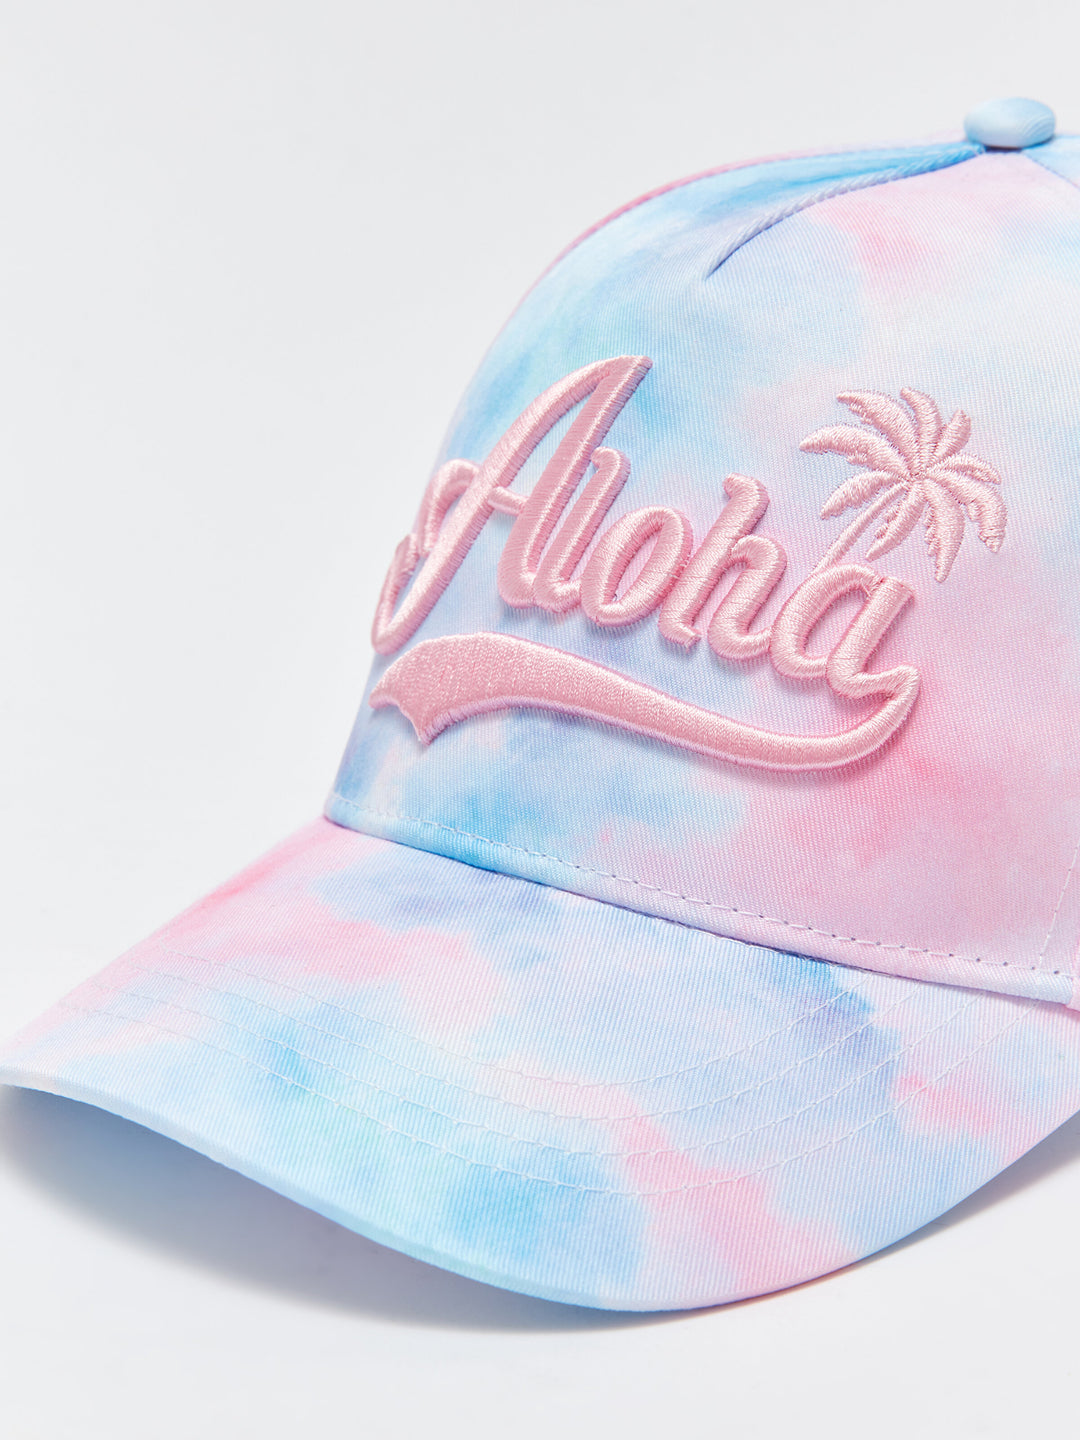 Embroidered Girls Cap Hat